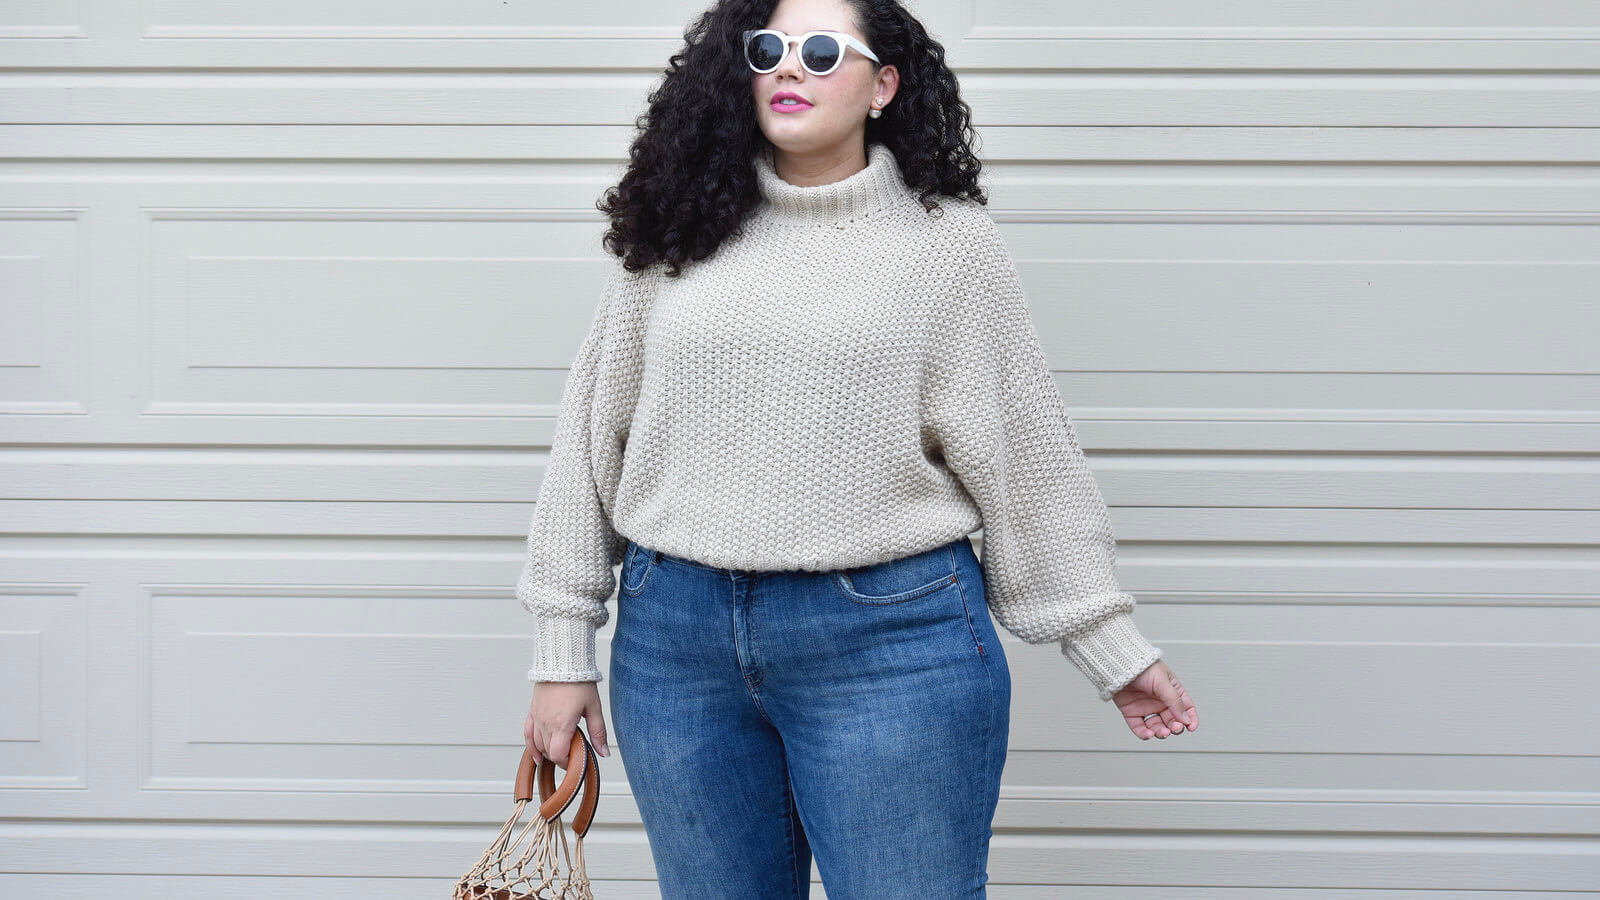 A Comfy outfit that’s still stylish via @GirlWithCurves #fashion #outfits #style #mom #curvy